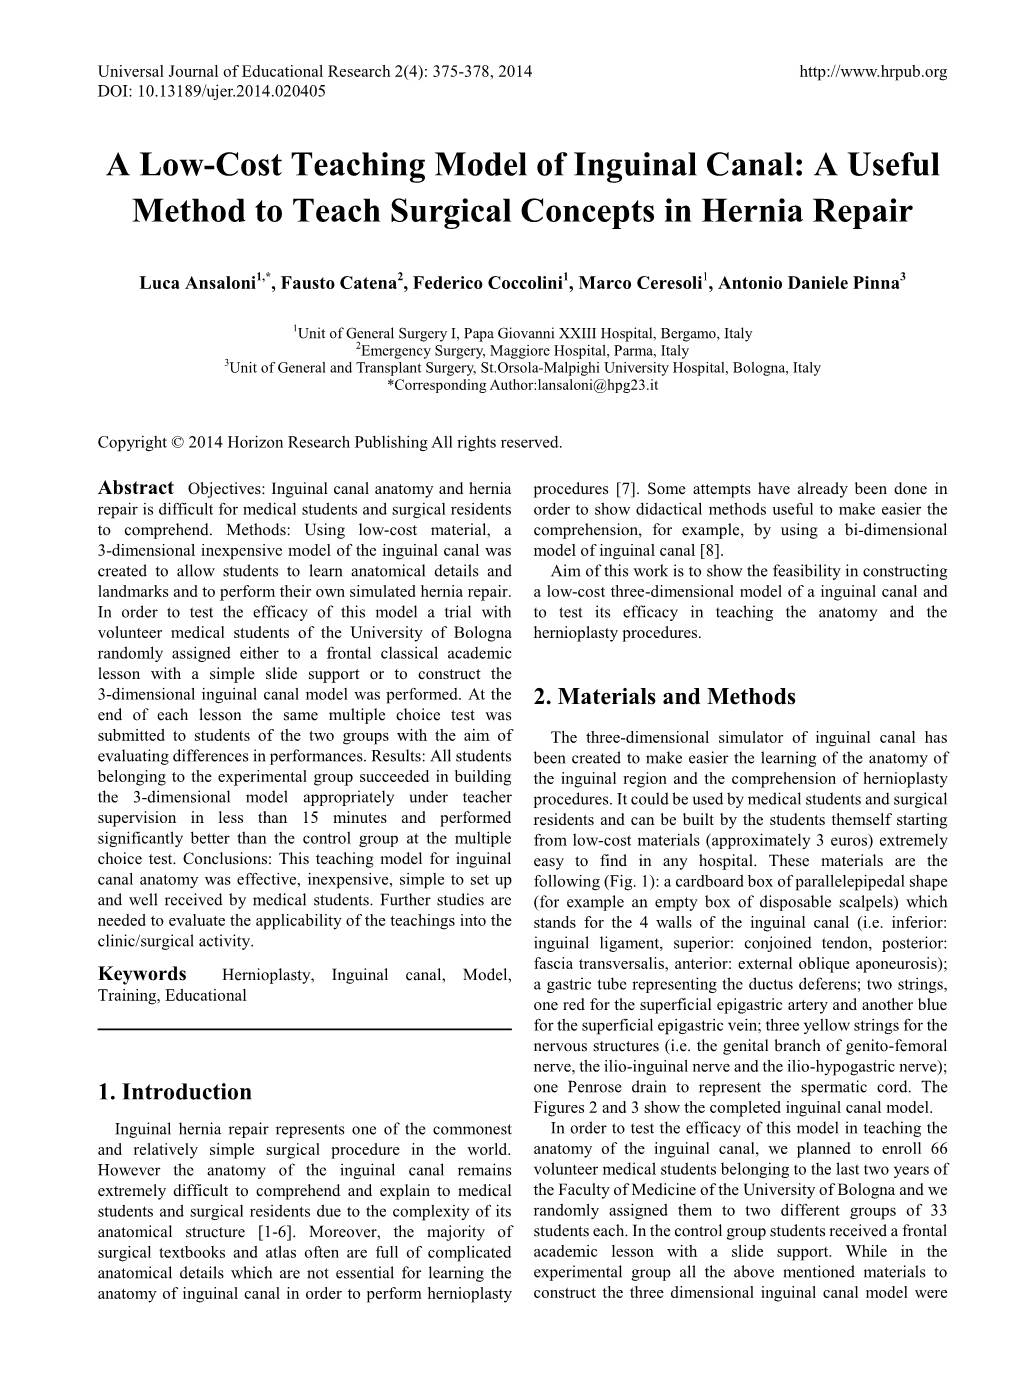 A Low-Cost Teaching Model of Inguinal Canal: a Useful Method to Teach Surgical Concepts in Hernia Repair